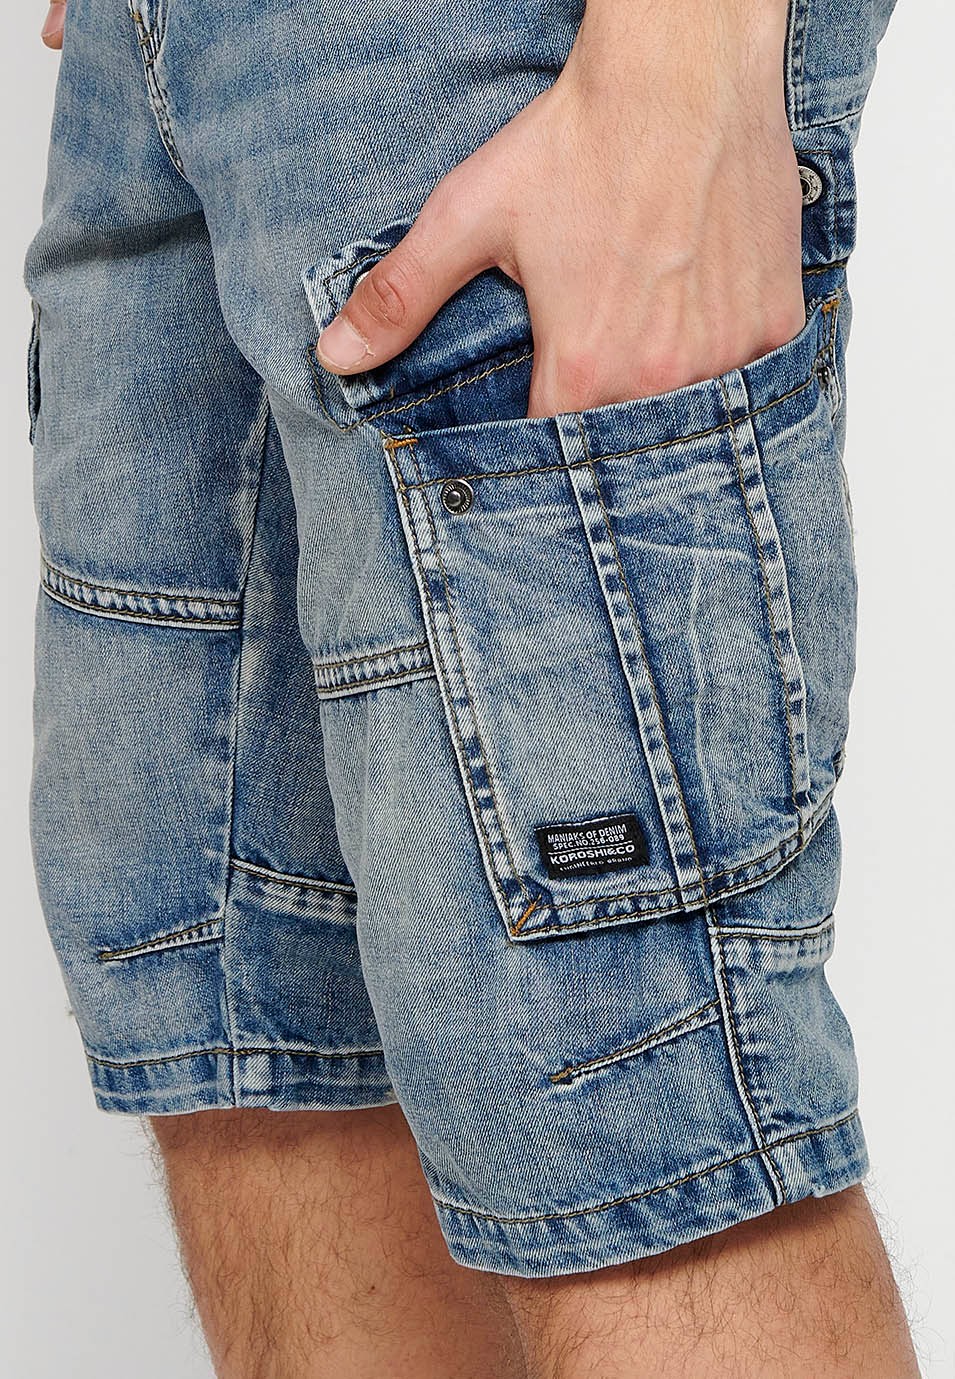 Denim Bermuda cargo shorts with front zipper and button closure with five pockets, one ticket pocket and two light blue sides, for Men 8